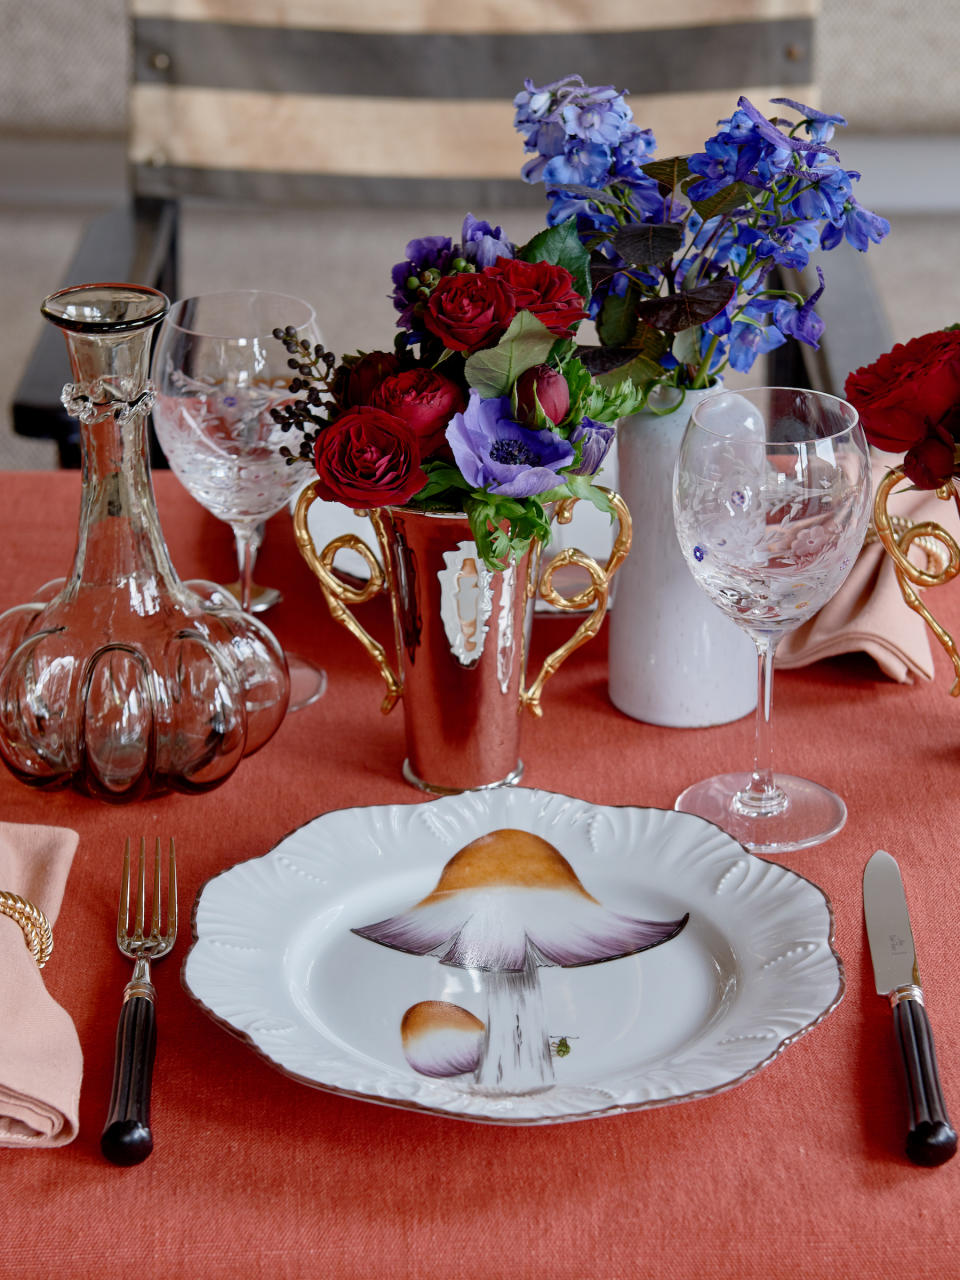 <p> Tablescaping is a huge trend right now, but it&apos;s an art the French have refined over centuries.&#xA0; </p> <p> If you want a rustic take on your dining table styling tricks, pair country checks and ginghams with fine crystal and decorative china.&#xA0; </p> <p> Flowers are a must and these can be either a centerpiece display or a few posies dotted down the length of the table. </p> <p> &apos;I find French country tablescaping is a welcoming and also incredibly versatile style, that can look just as wonderful in a city dwelling,&apos; says Gemma Martinez de Ana from tableware brand Bonadea. </p> <p> &apos;For me, it is the natural textures, organic elements, mismatched china and of course, the slight imperfection, that deliver that splash of rustic charm. Think rattan, crisp starched thick linens, bowls filled to the brim with fresh produce, and carafes and pitchers scattered along the table.&apos; </p> <p> Take the formality out of country dining by pairing casual seating with a considered table setting. And don&apos;t forget to add characterful pieces for originality &#x2013; these champignons plates are just perfect. </p> <p> &apos;I like bringing &#xA0;organic elements into the china, so mushrooms handpainted on a plate are always welcome,&apos; agrees Gemma Martinez de Ana. </p>